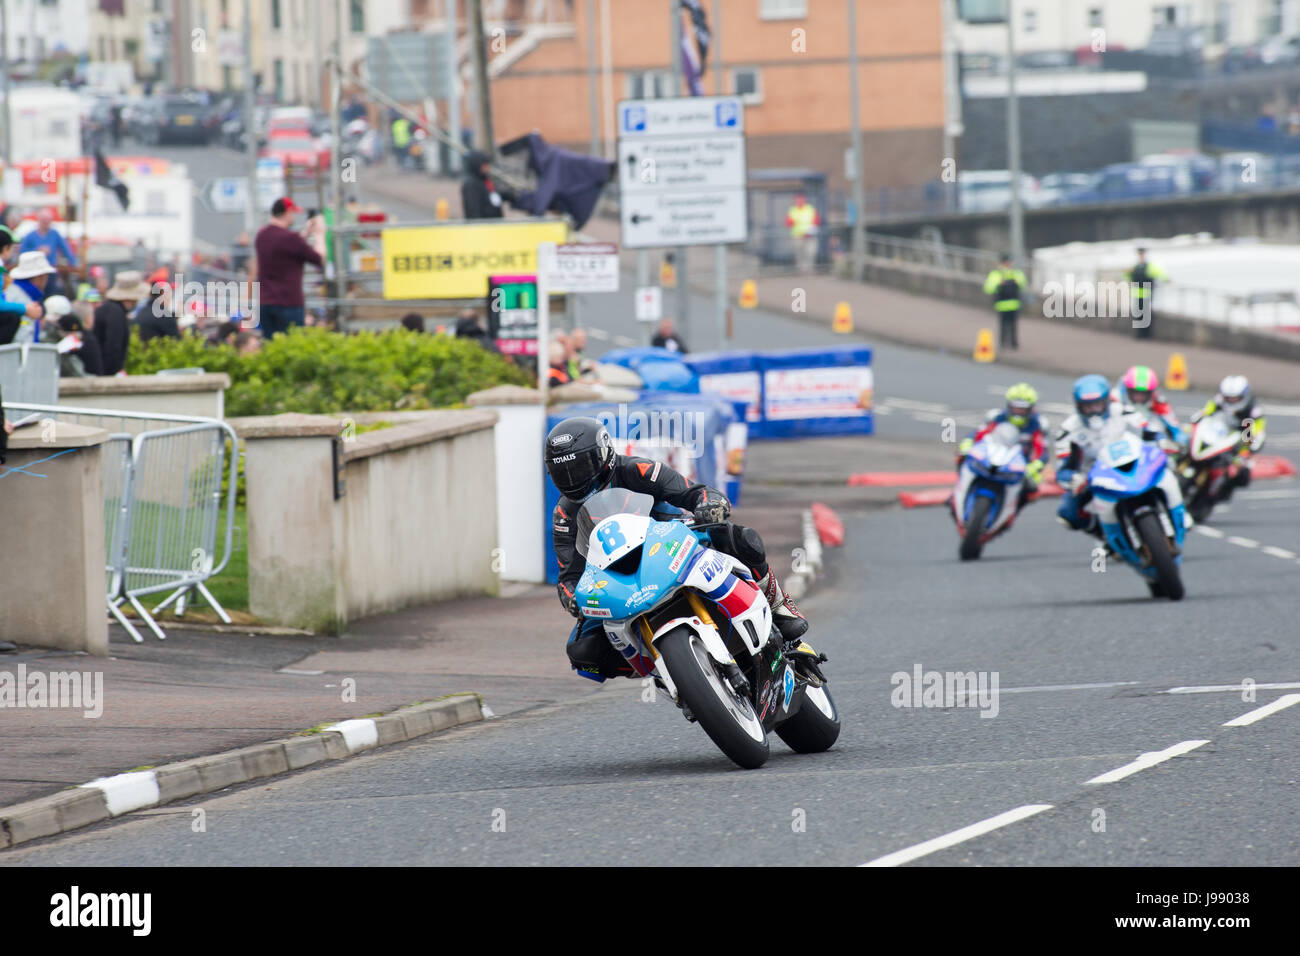 North West 200 International Motorcycle Road Races Stock Photo